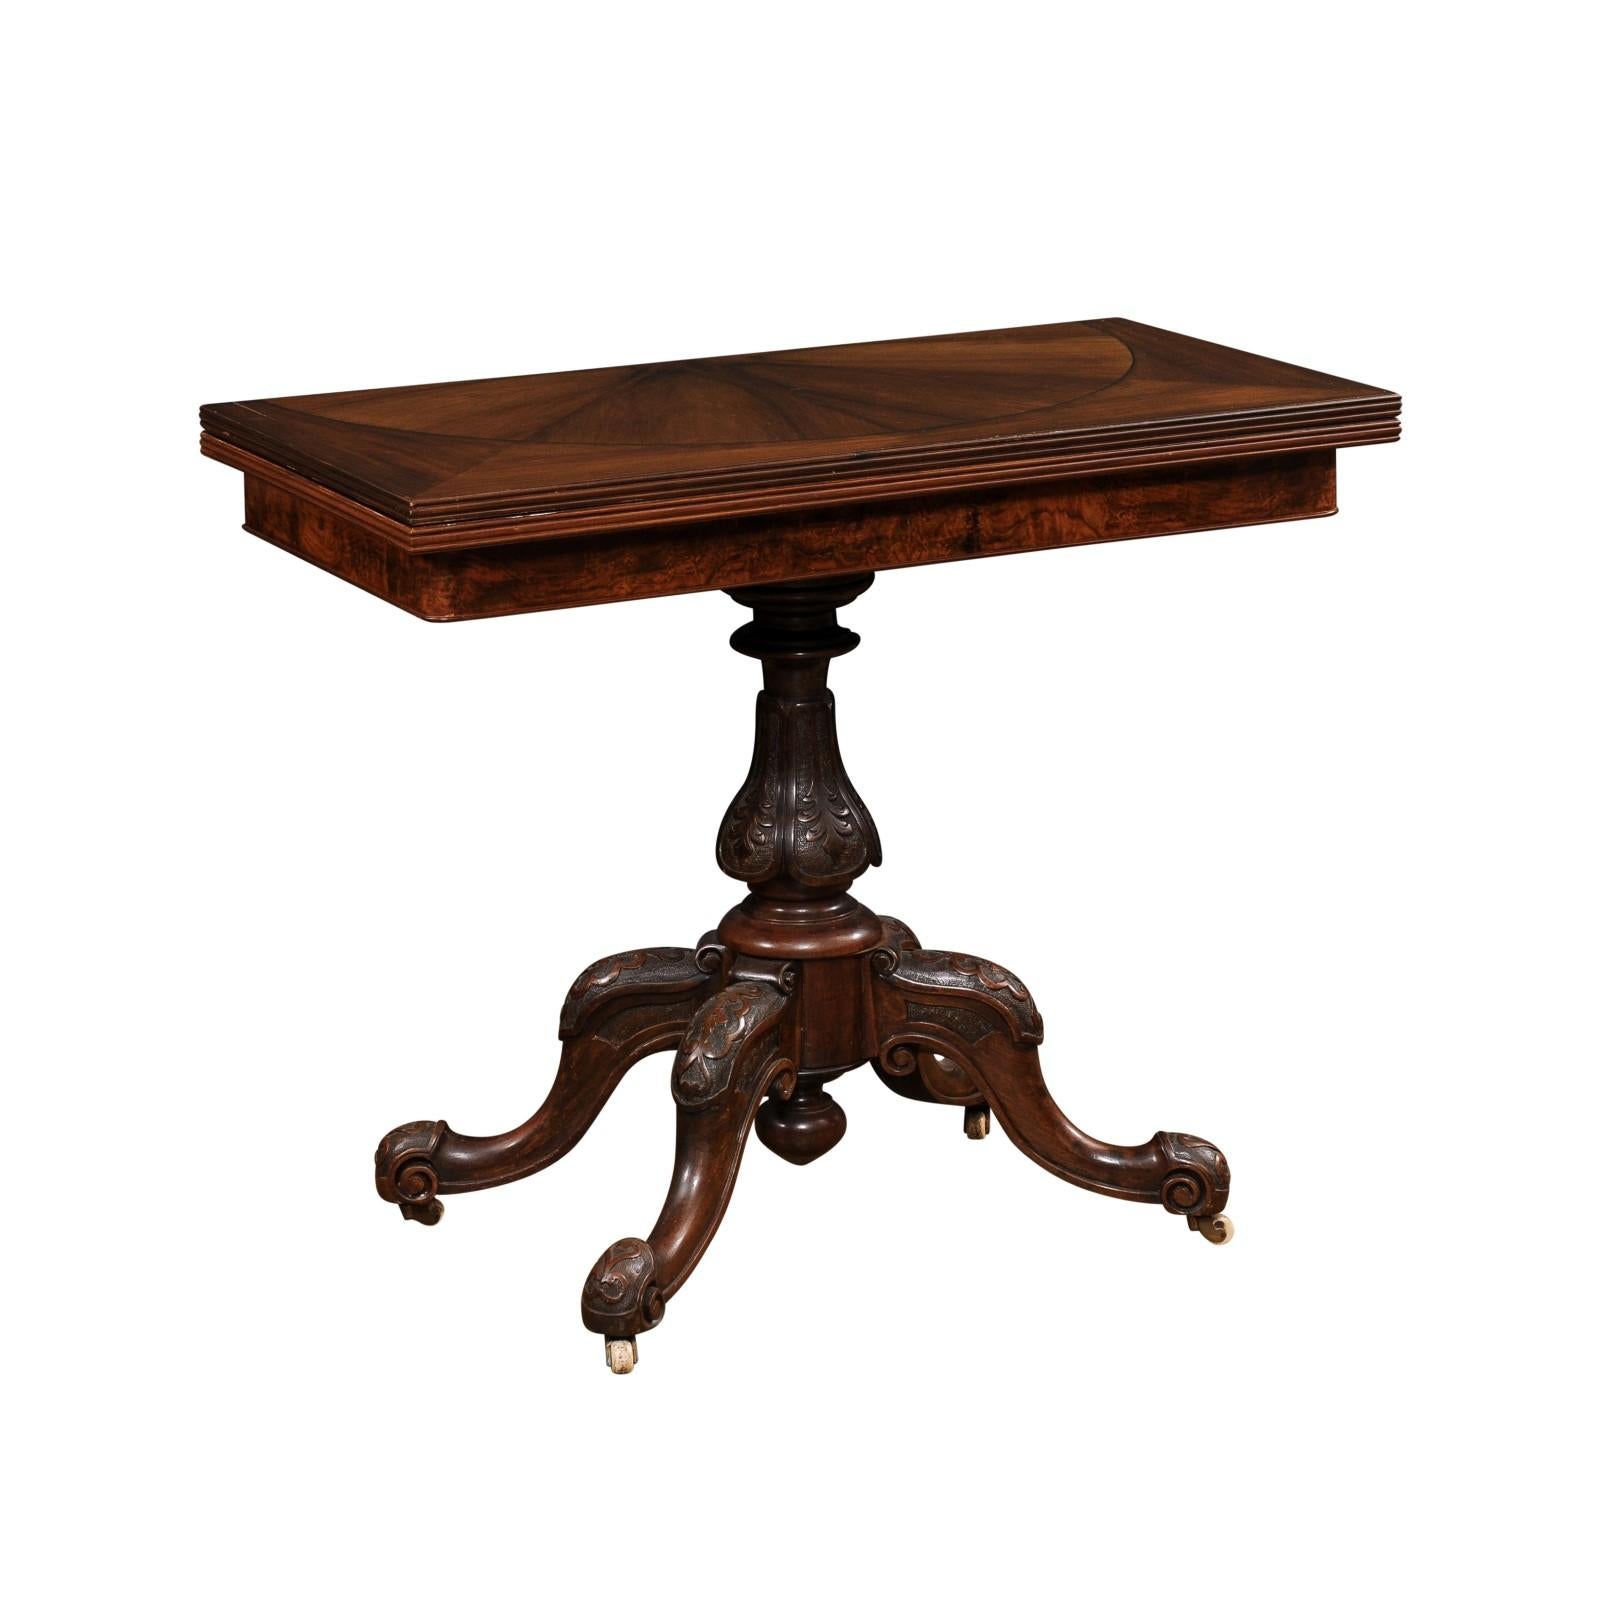 An English Victorian period fold-over walnut mahogany game table from the 19th century with bookmatched top and carved base on casters. Step into the elegance of the Victorian era with this exquisite English fold-over mahogany game table from the